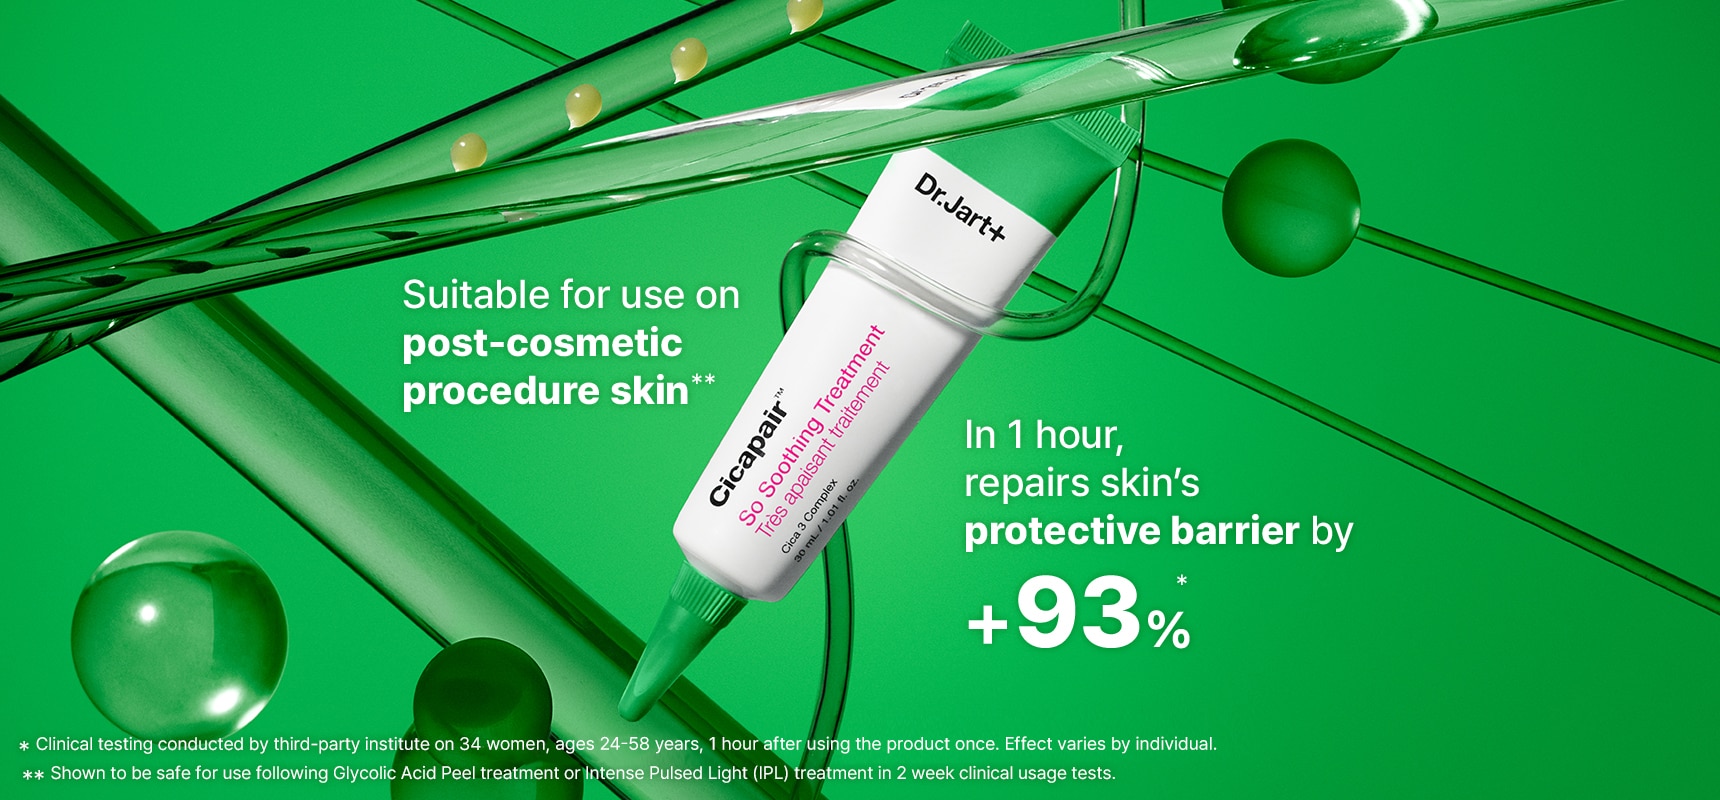 Magnified So Soothing tube featuring shades of green. For use post-cosmetic procedure. In one hour repair barrier by +93%.